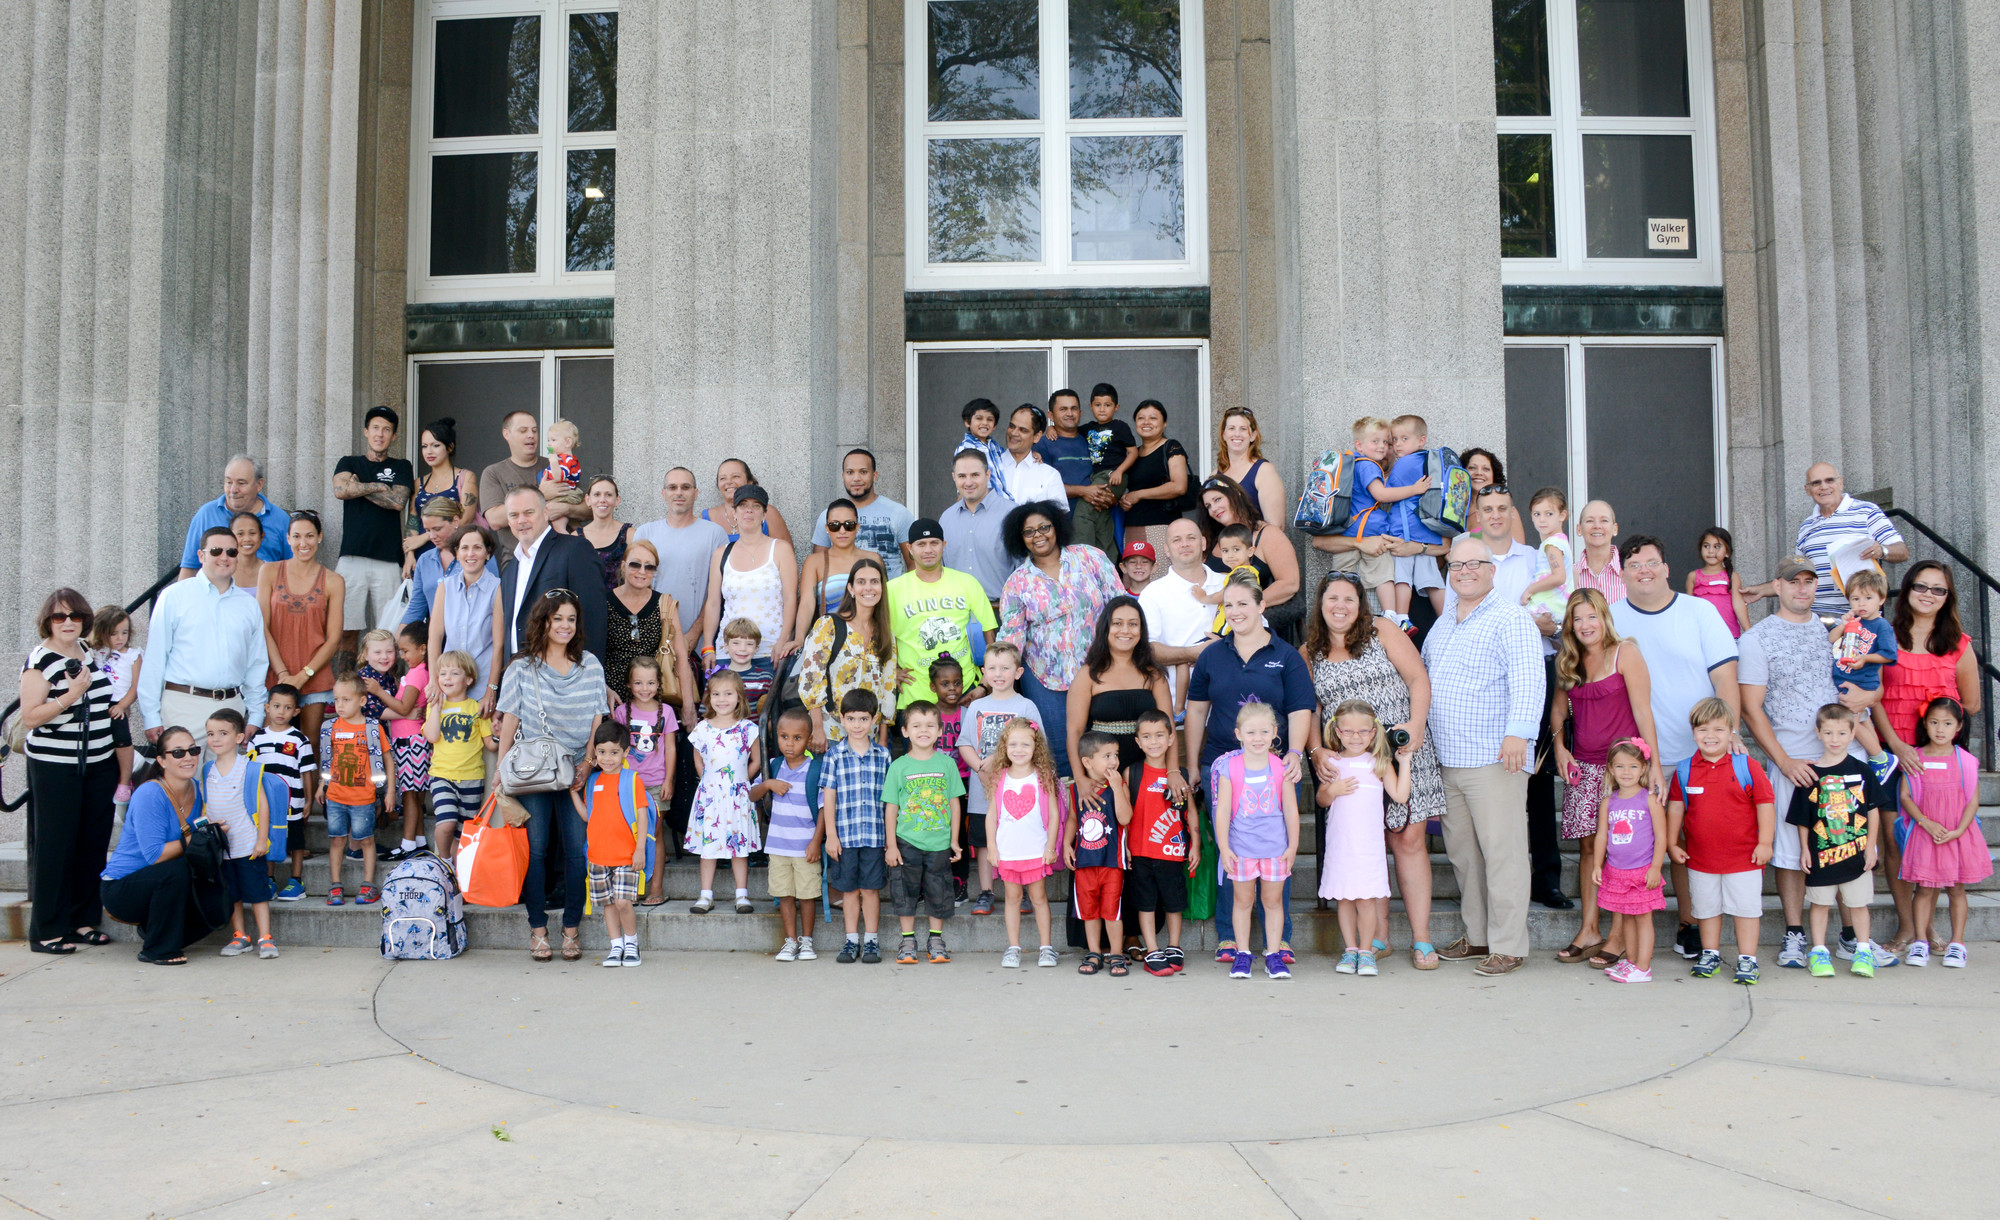 The Class of 2027 arrived for the first day of Kindergarten on September 2.